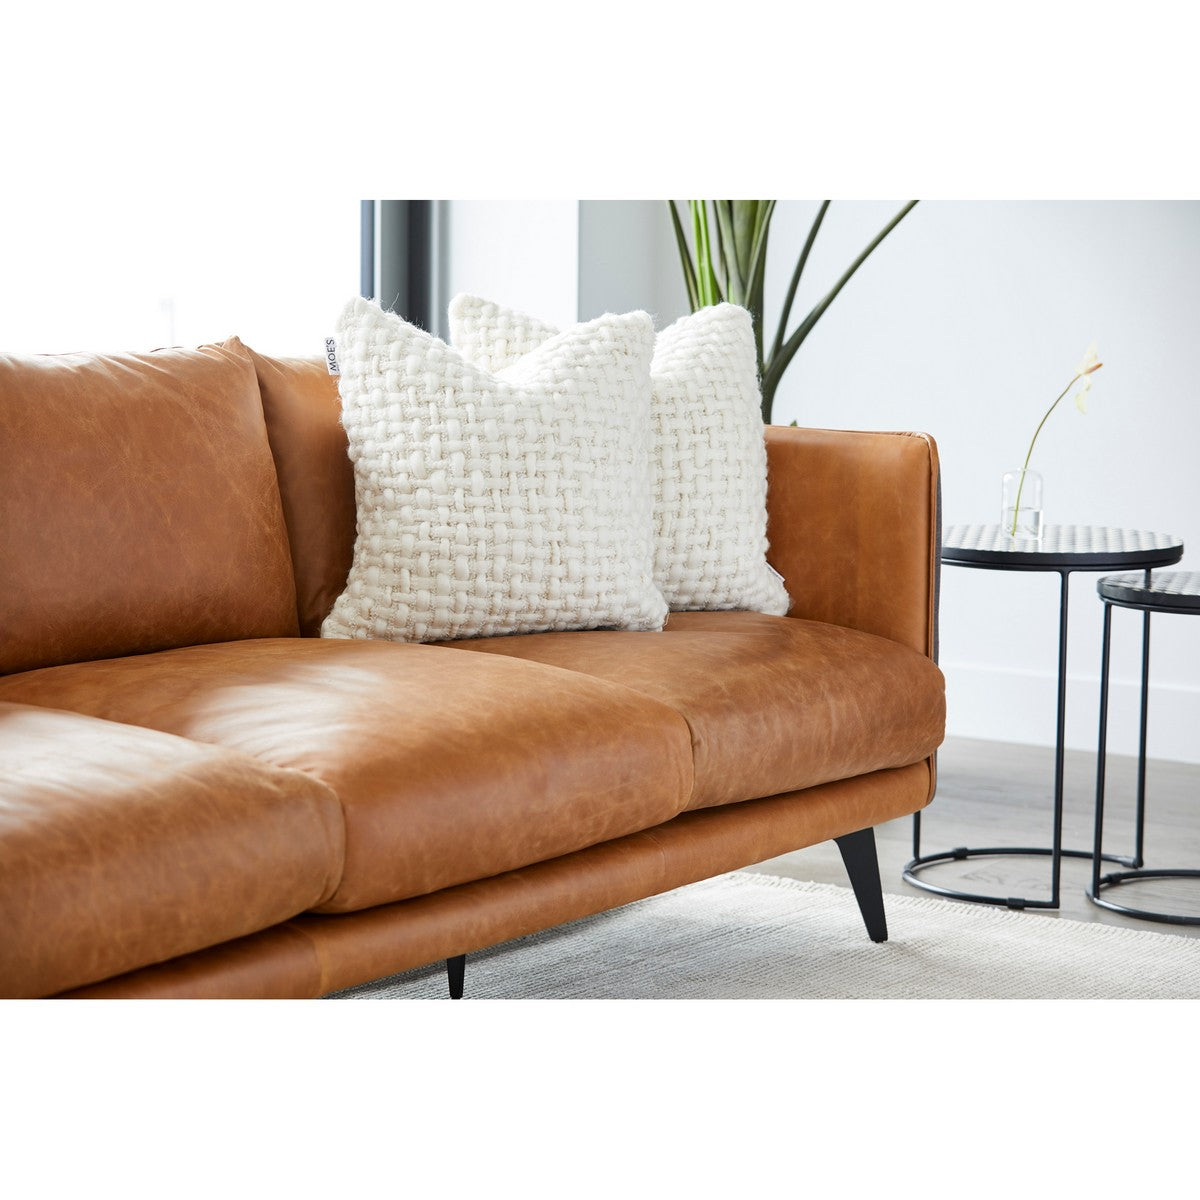 Moe's Home Collection Messina Leather Sofa Cognac - PK-1097-23 - Moe's Home Collection - Sofas - Minimal And Modern - 1